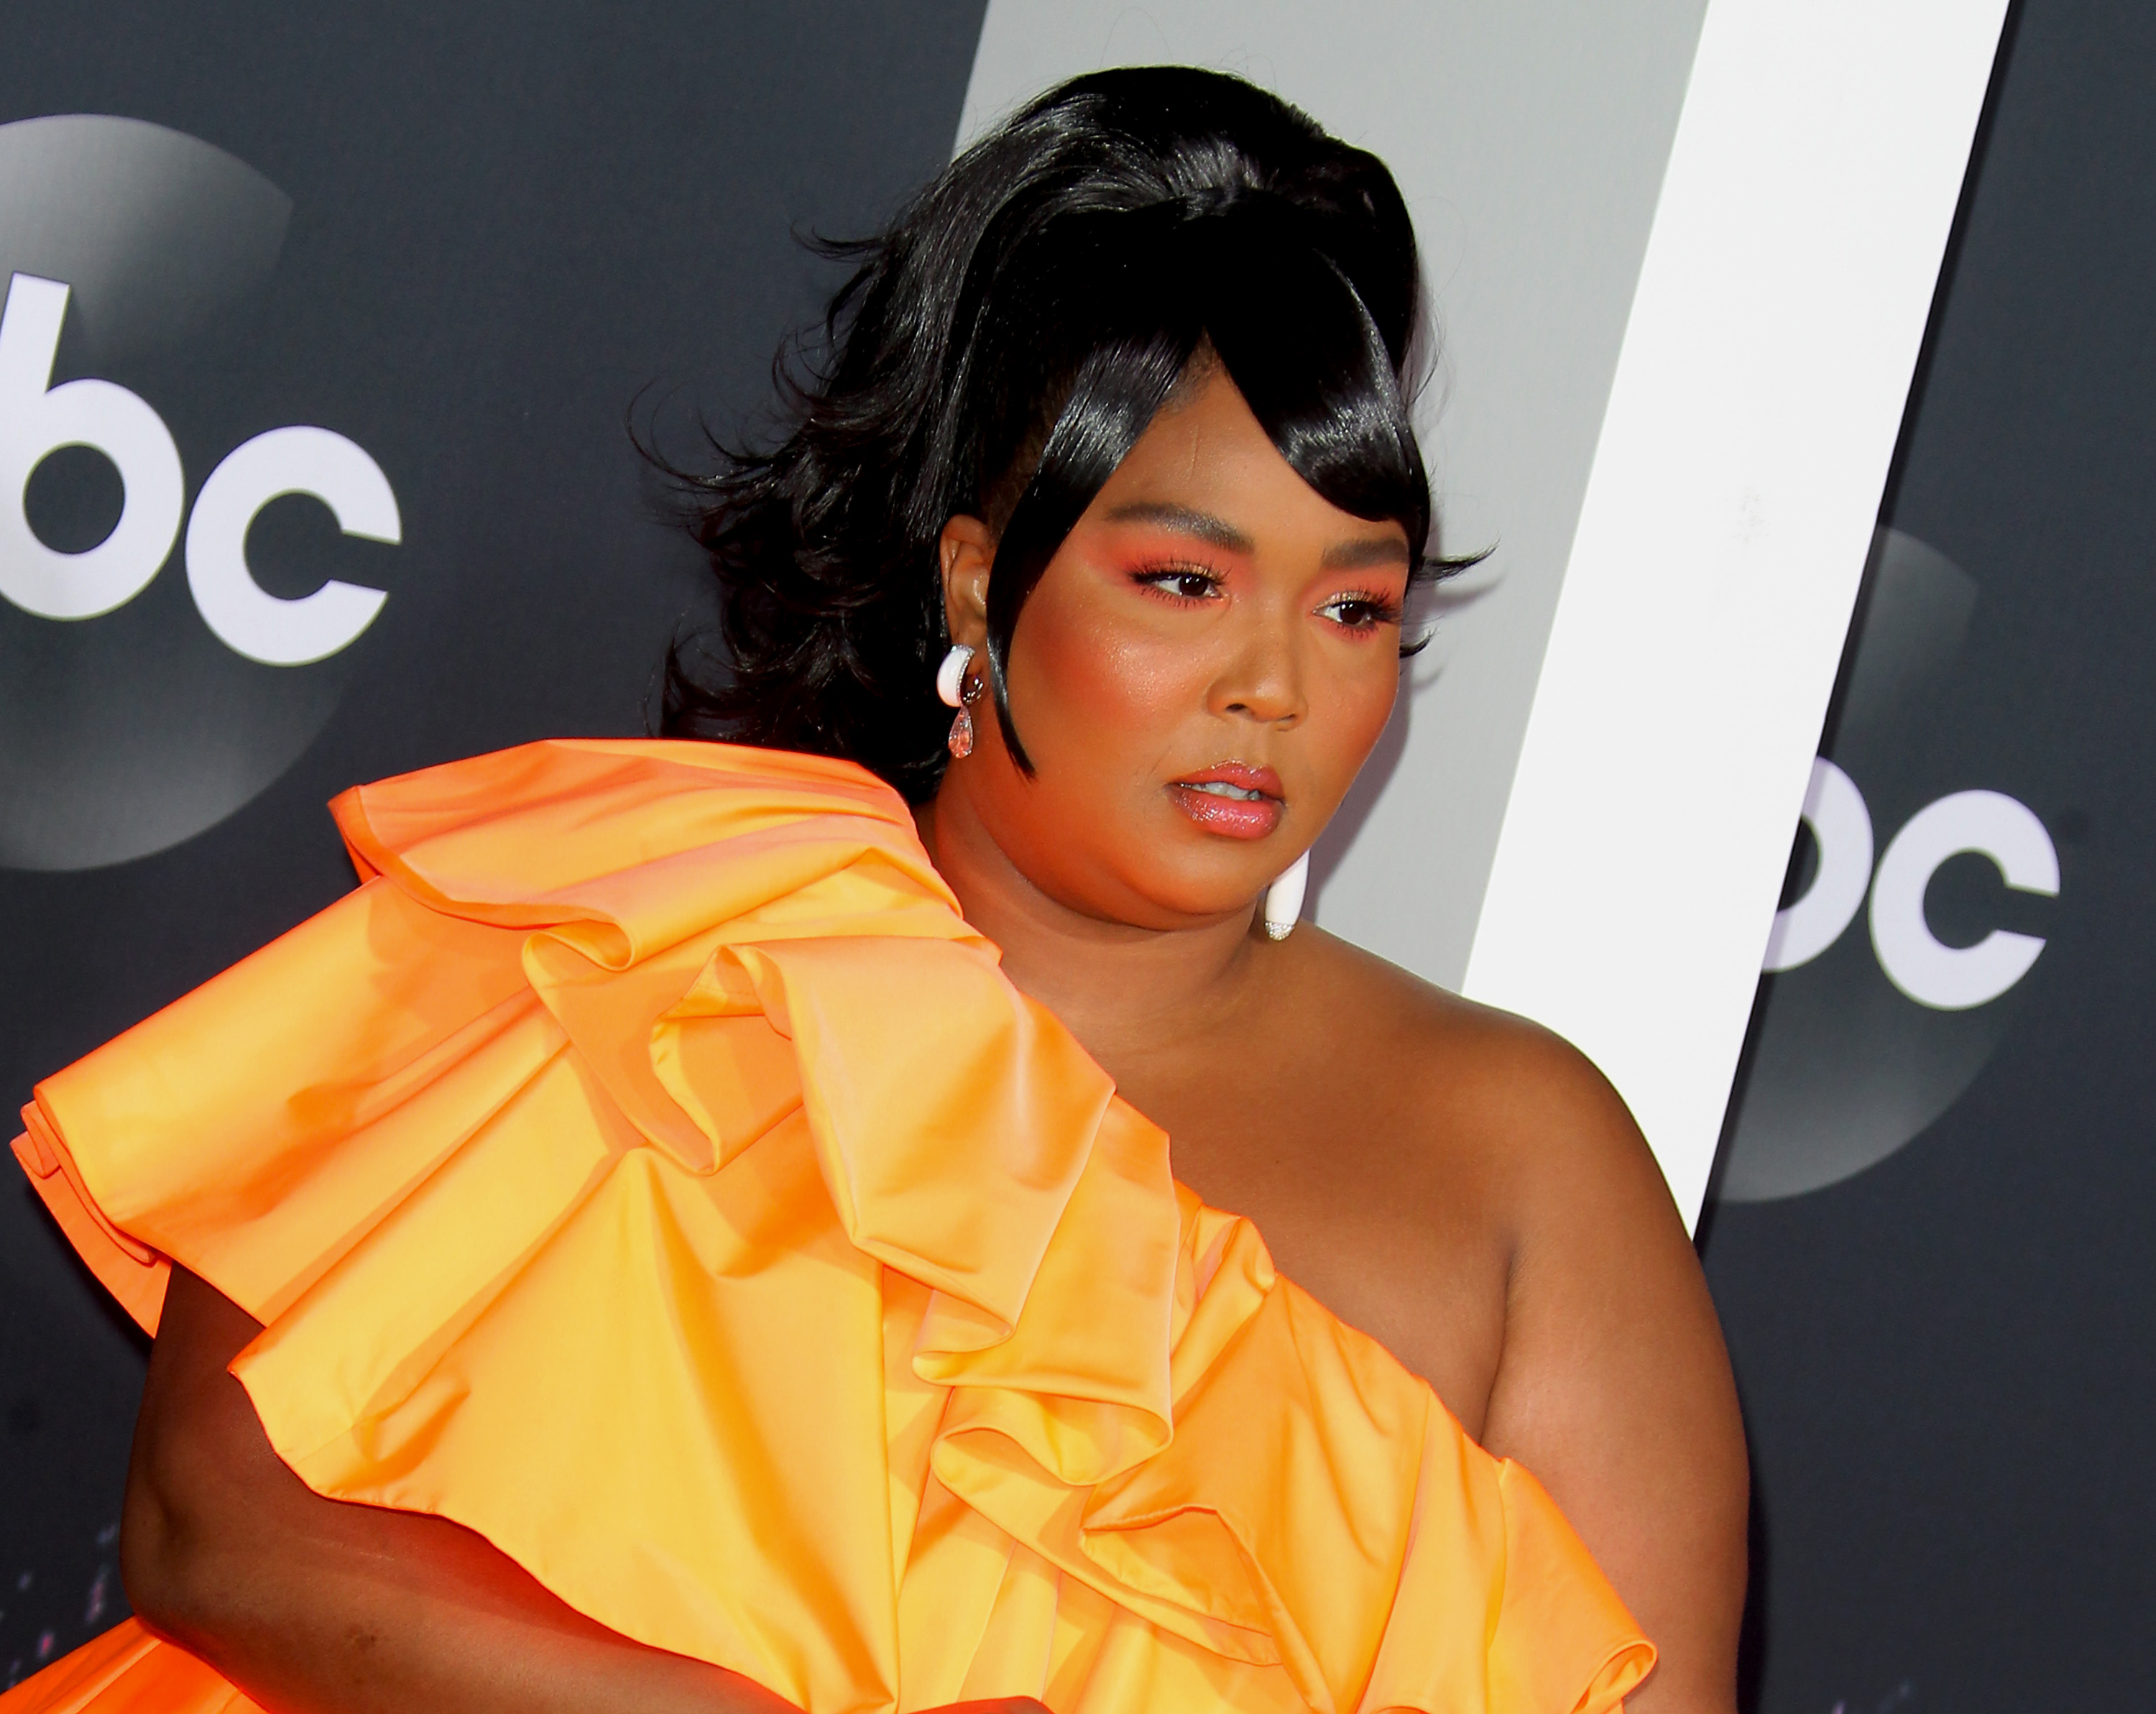 Lizzo Carries the Tiniest Purse Ever on the American Music Awards 2019 Red  Carpet!: Photo 4393067 | 2019 American Music Awards, American Music Awards,  Lizzo Photos | Just Jared: Entertainment News